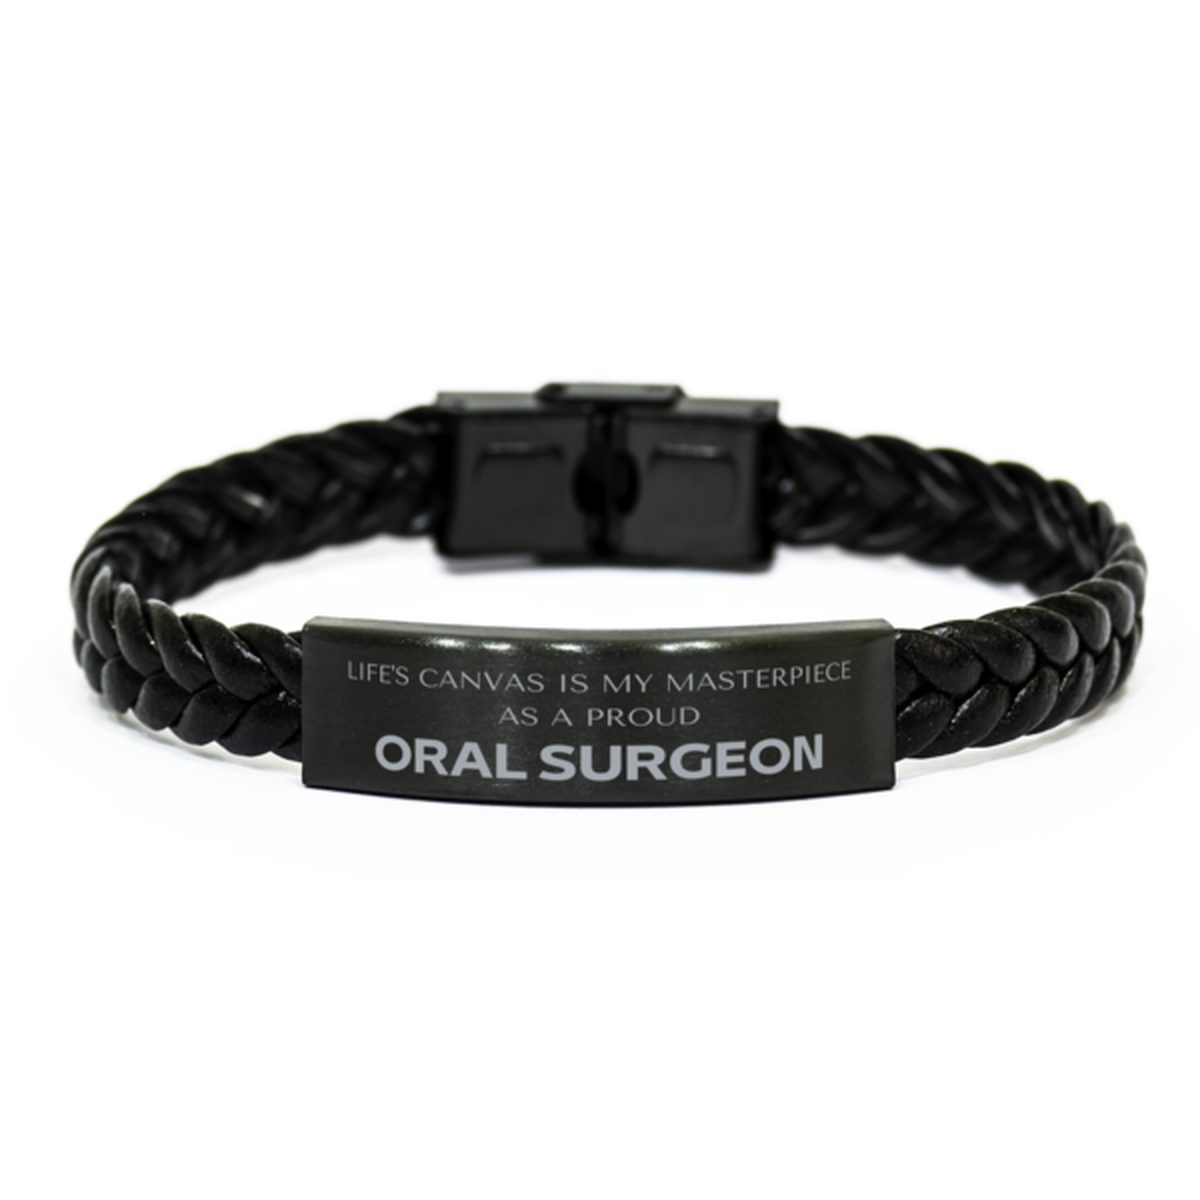 Proud Oral Surgeon Gifts, Life's canvas is my masterpiece, Epic Birthday Christmas Unique Braided Leather Bracelet For Oral Surgeon, Coworkers, Men, Women, Friends